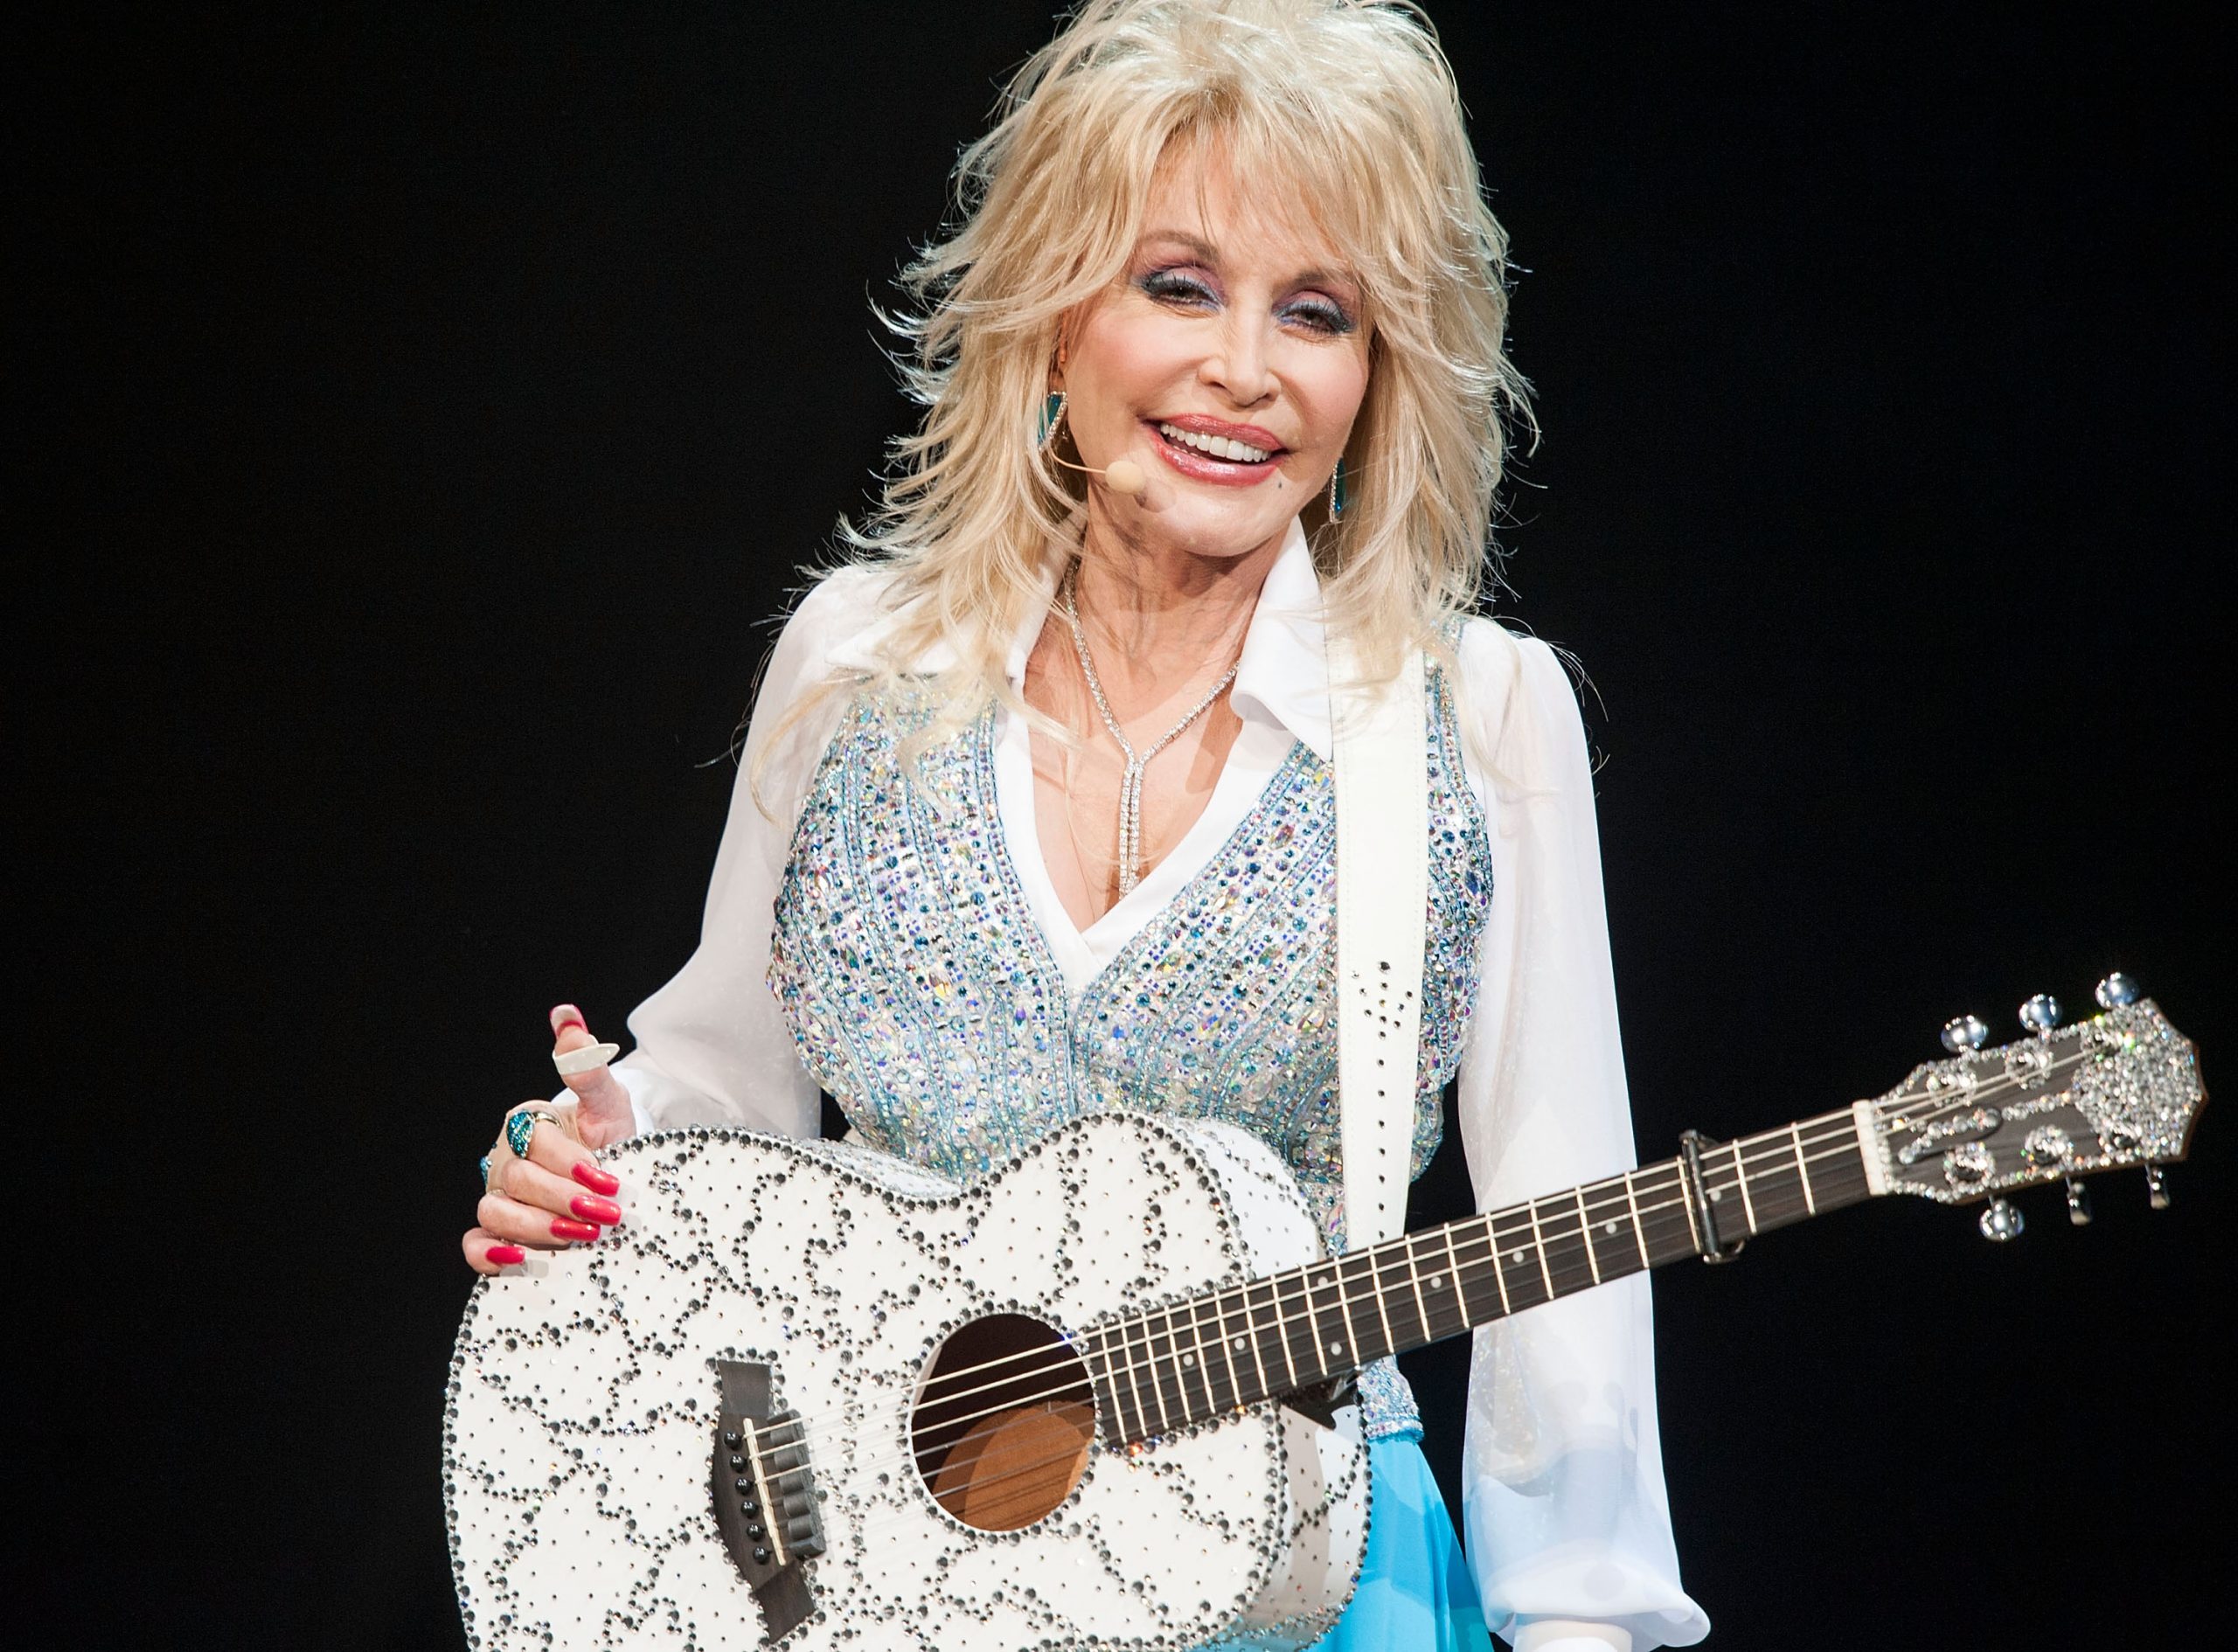 Dolly Parton smiles as she wears a white outfit and holds a guitar